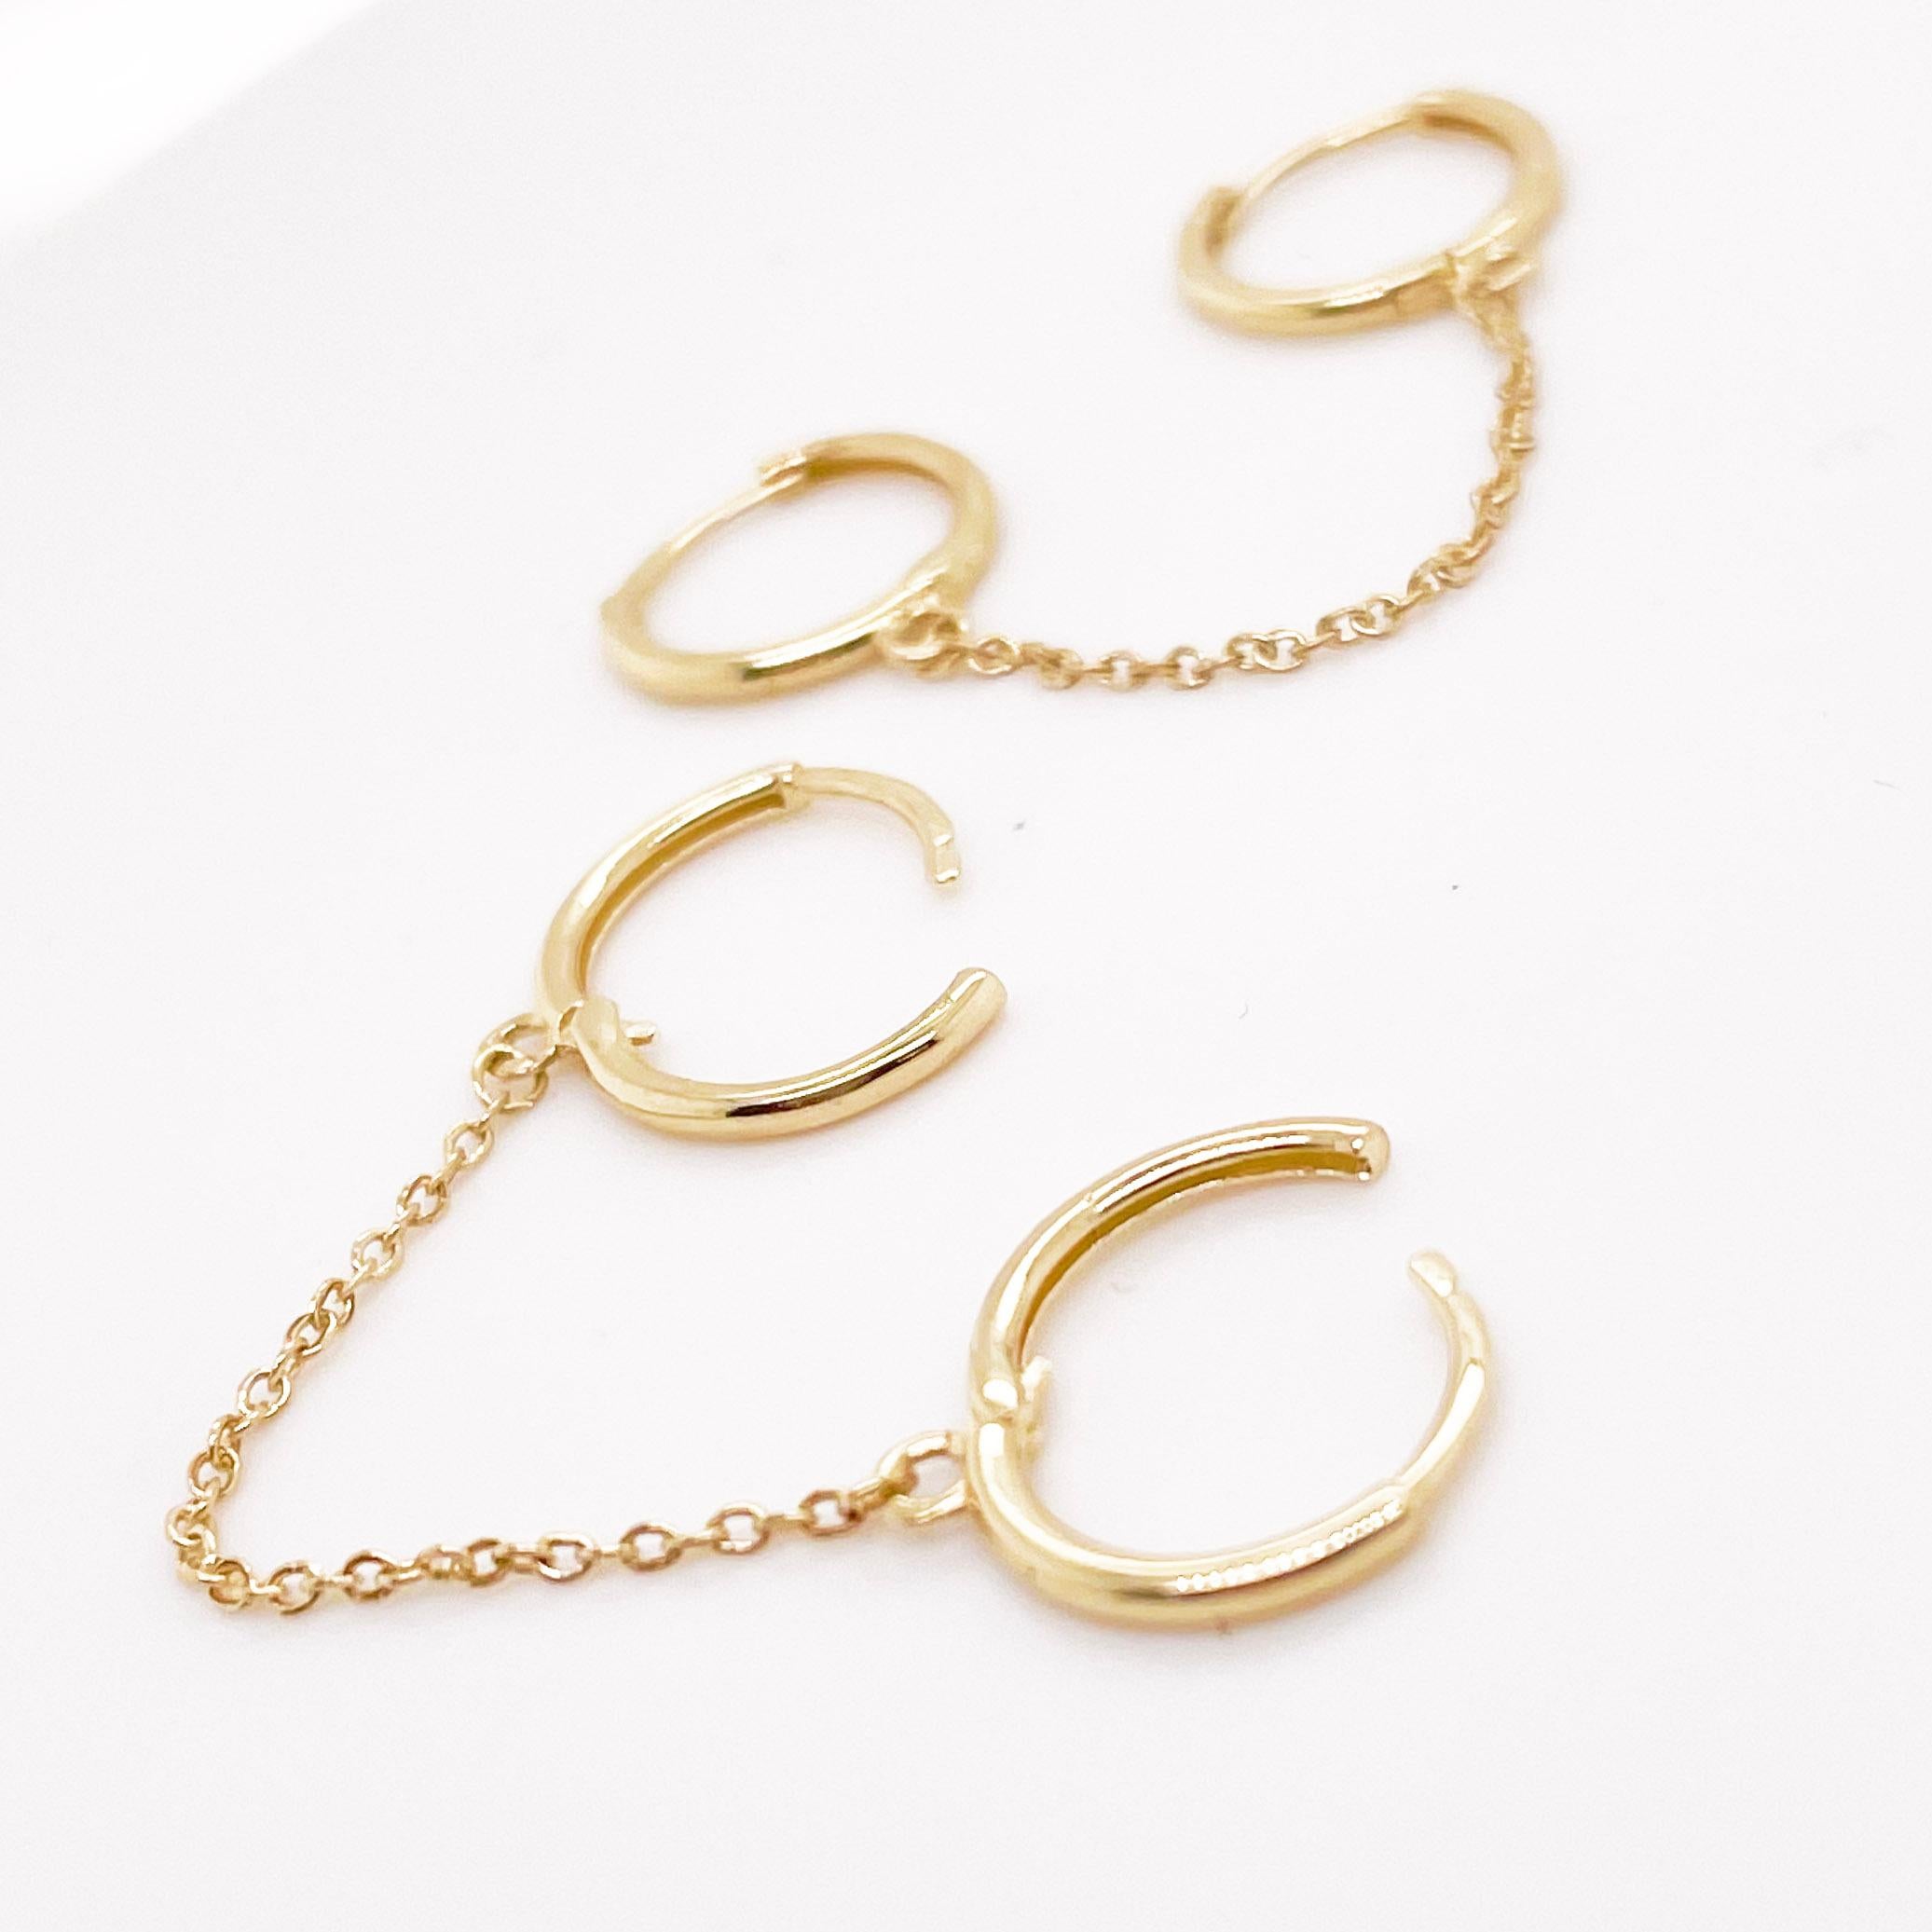 Trendy double huggie hoop earrings! This design is the most popular hoop earring style in 2022 fashion. The earrings have two huggies that are connected by a cable chain. The earrings is meant to be worn on an ear with at least 2 ear piercings. The